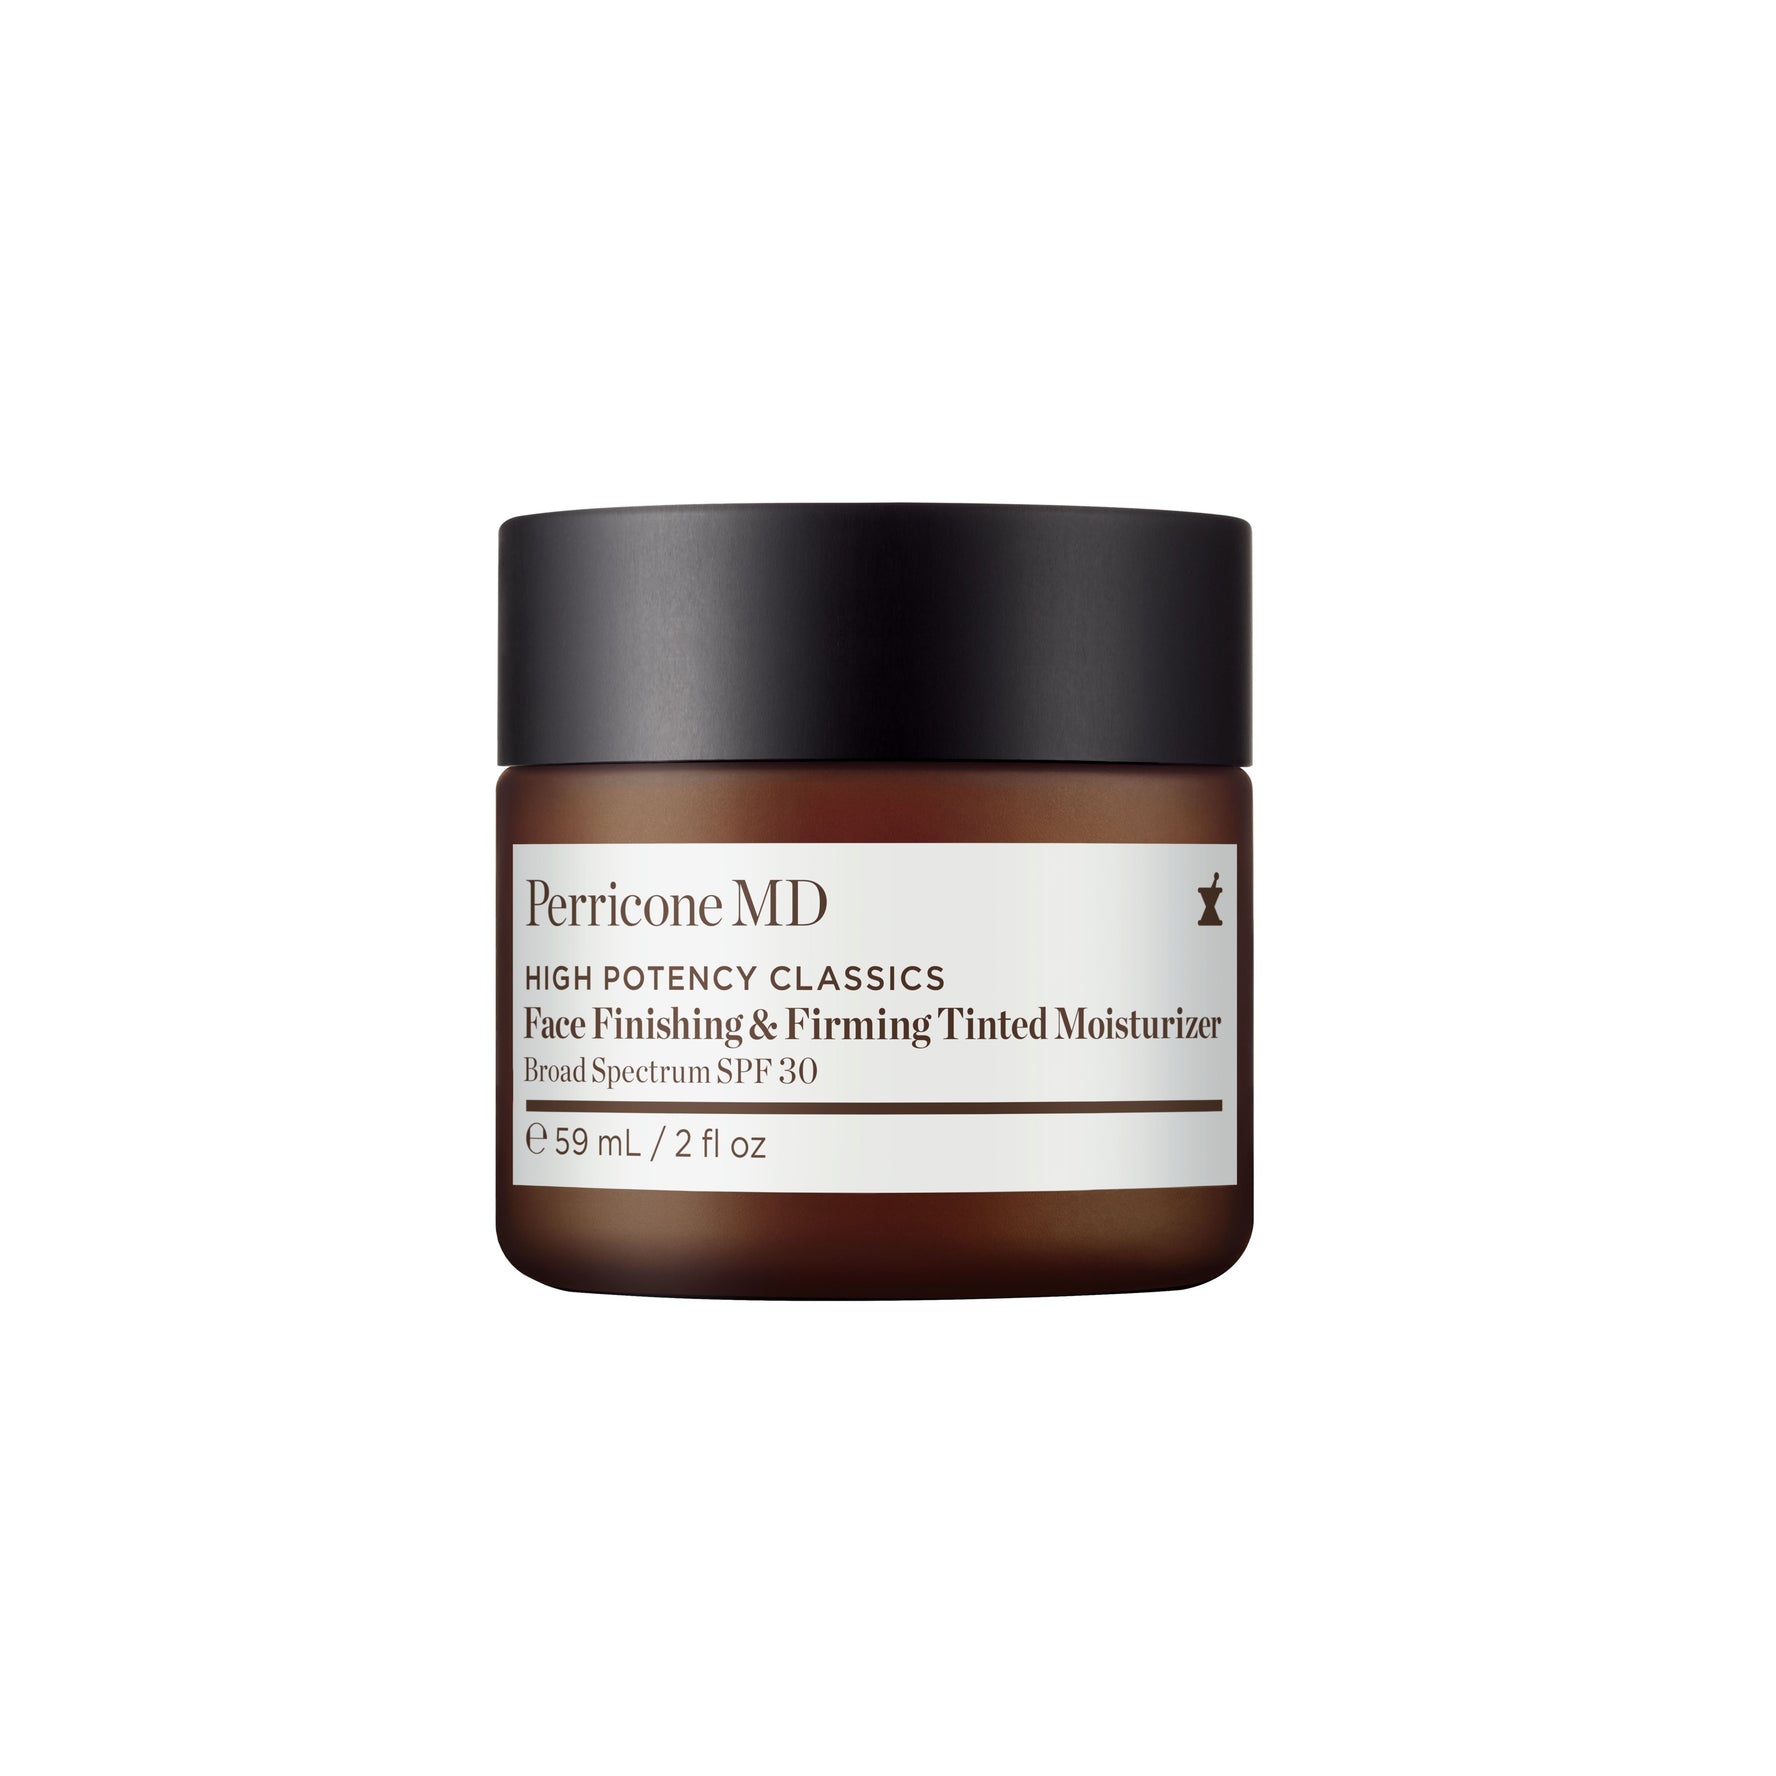 Perricone MD High Potency Classics Face Finishing & Firming Tinted Moisturizer Broad Spectrum SPF 30 (59ml)